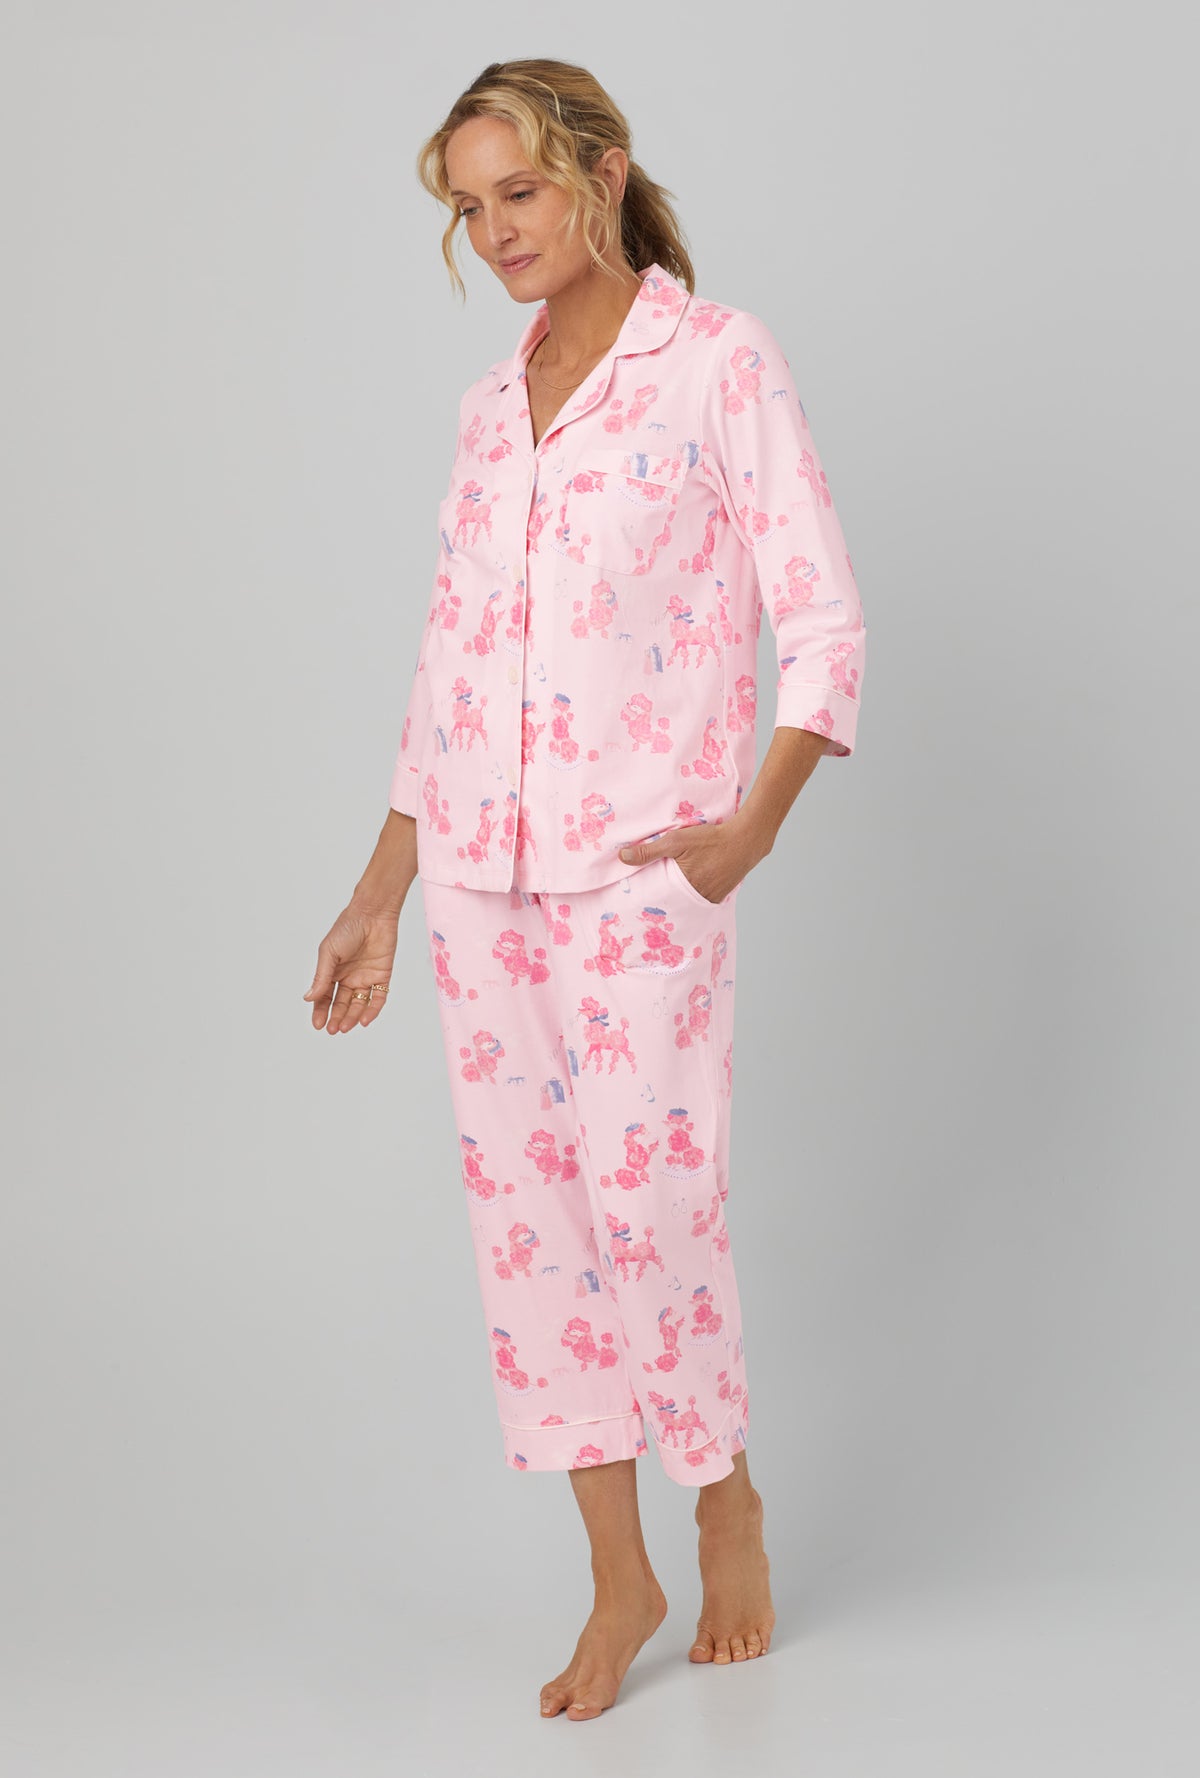 A lady wearing Pink 3/4 Sleeve Classic Stretch Jersey Cropped PJ Set with Pampered Poodles  print